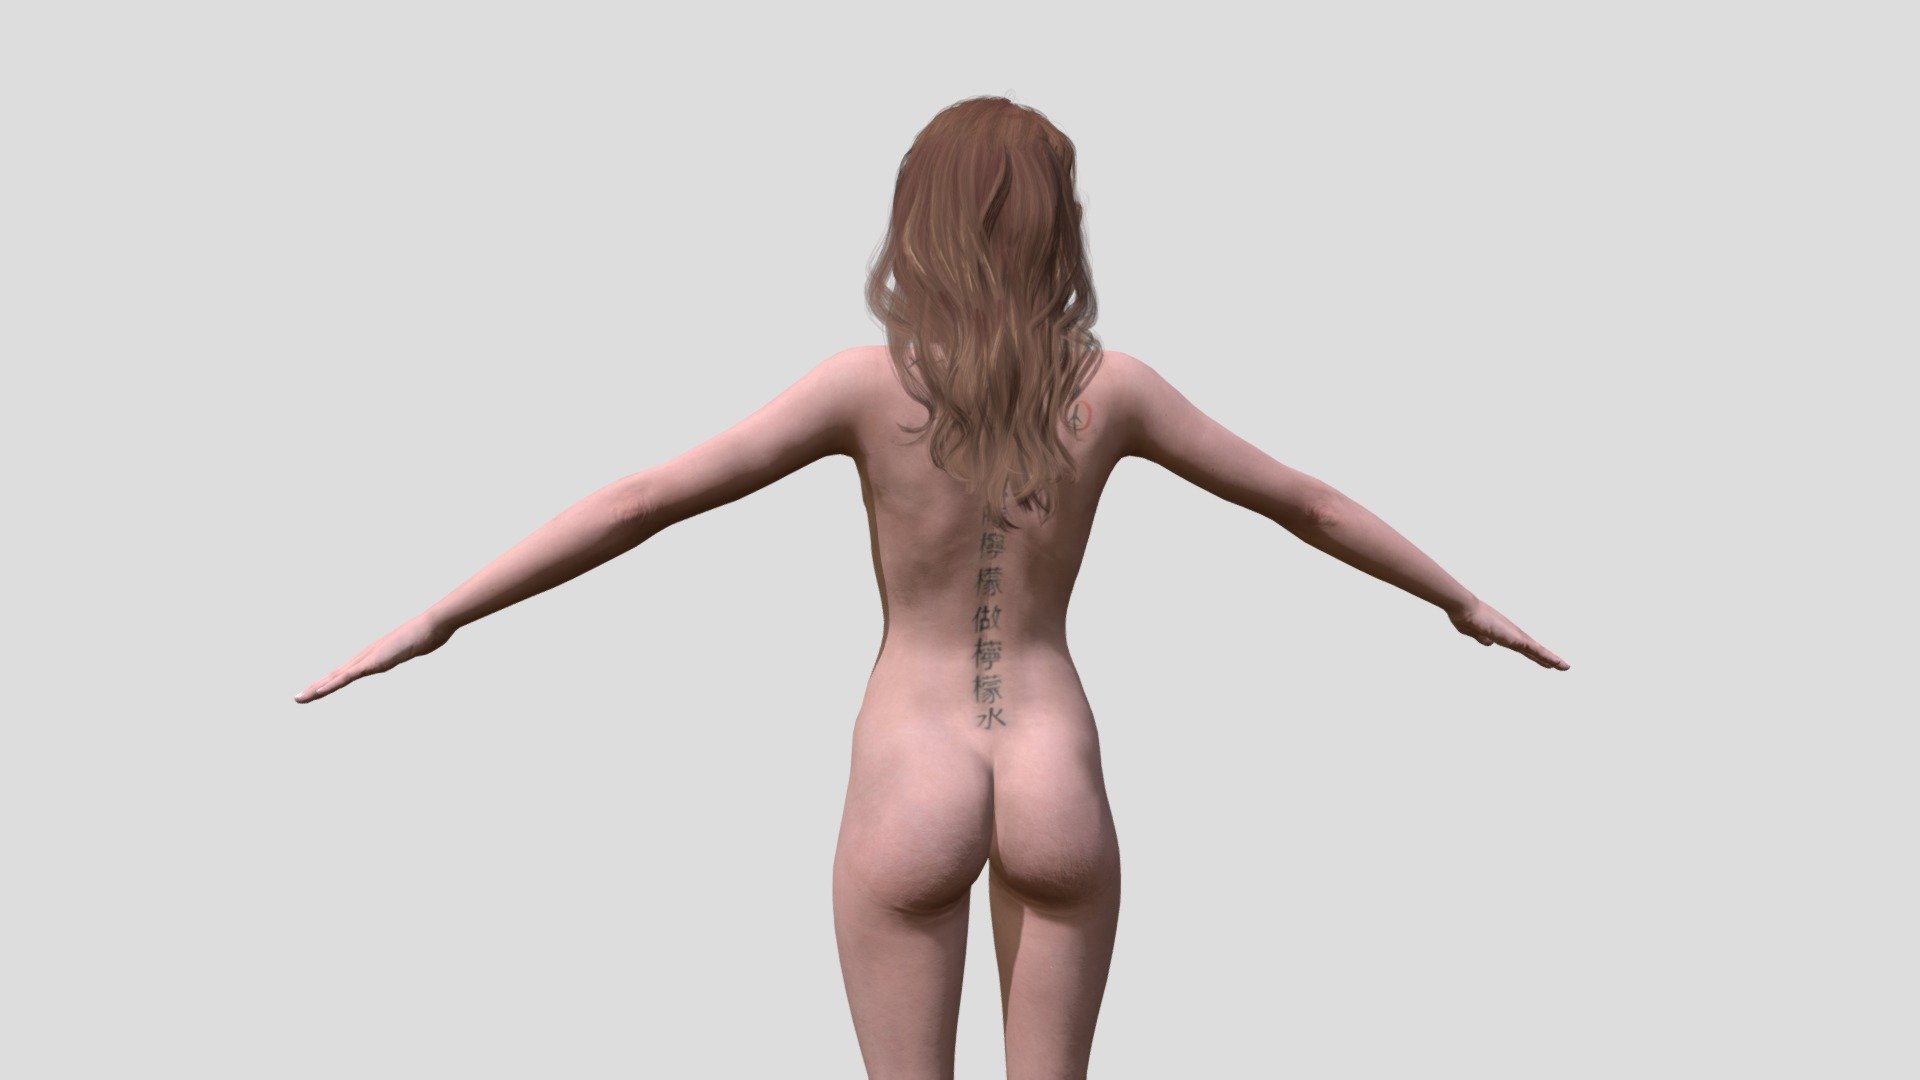 Riley Reid 3d rigged model

For buy this 3D model find: &ldquo;Riley Reid rigged